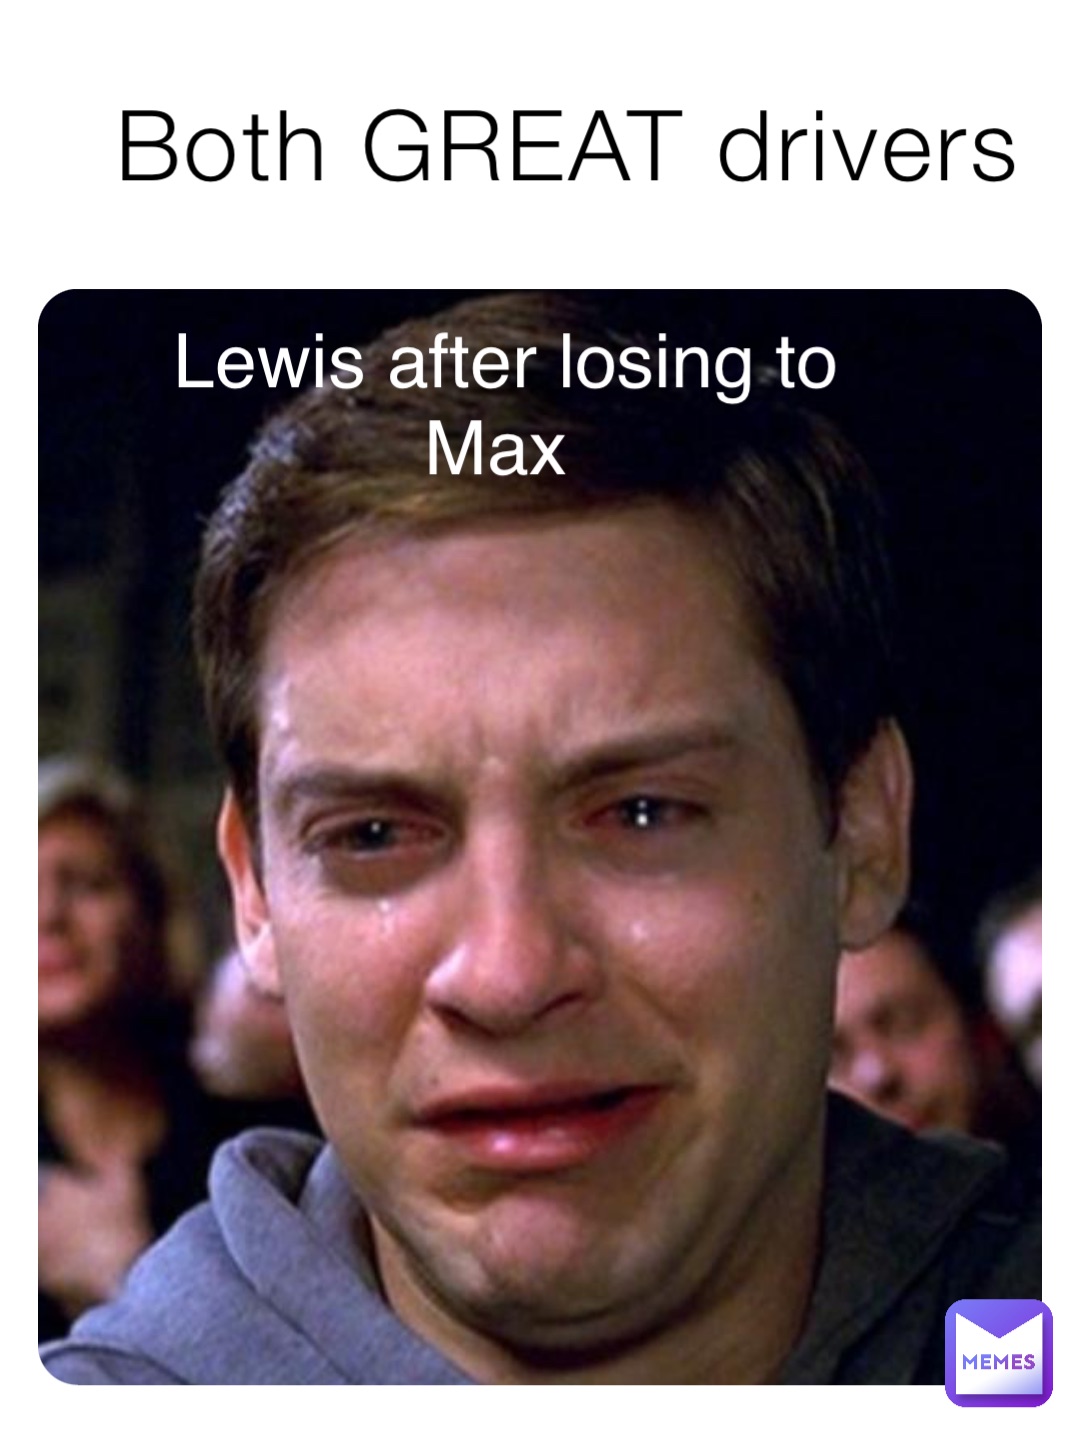 Both GREAT drivers Lewis after losing to Max